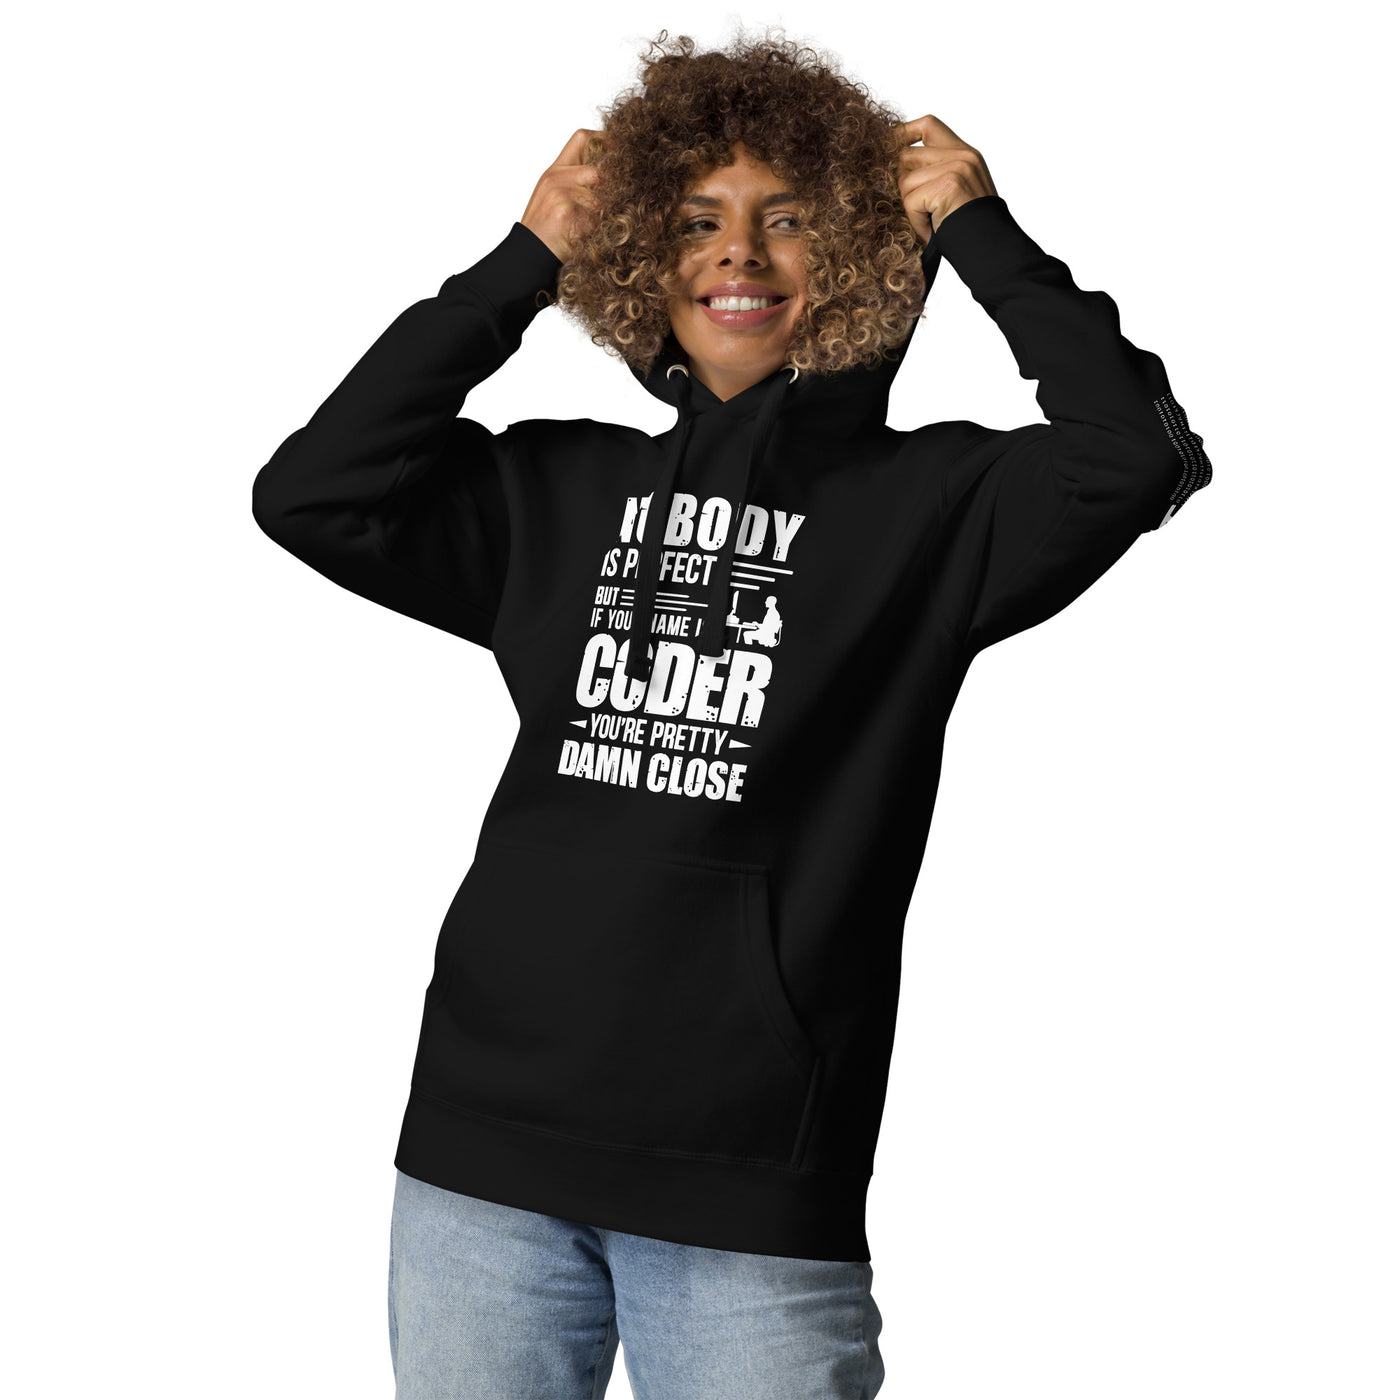 Coder Close to Perfect - Unisex Hoodie